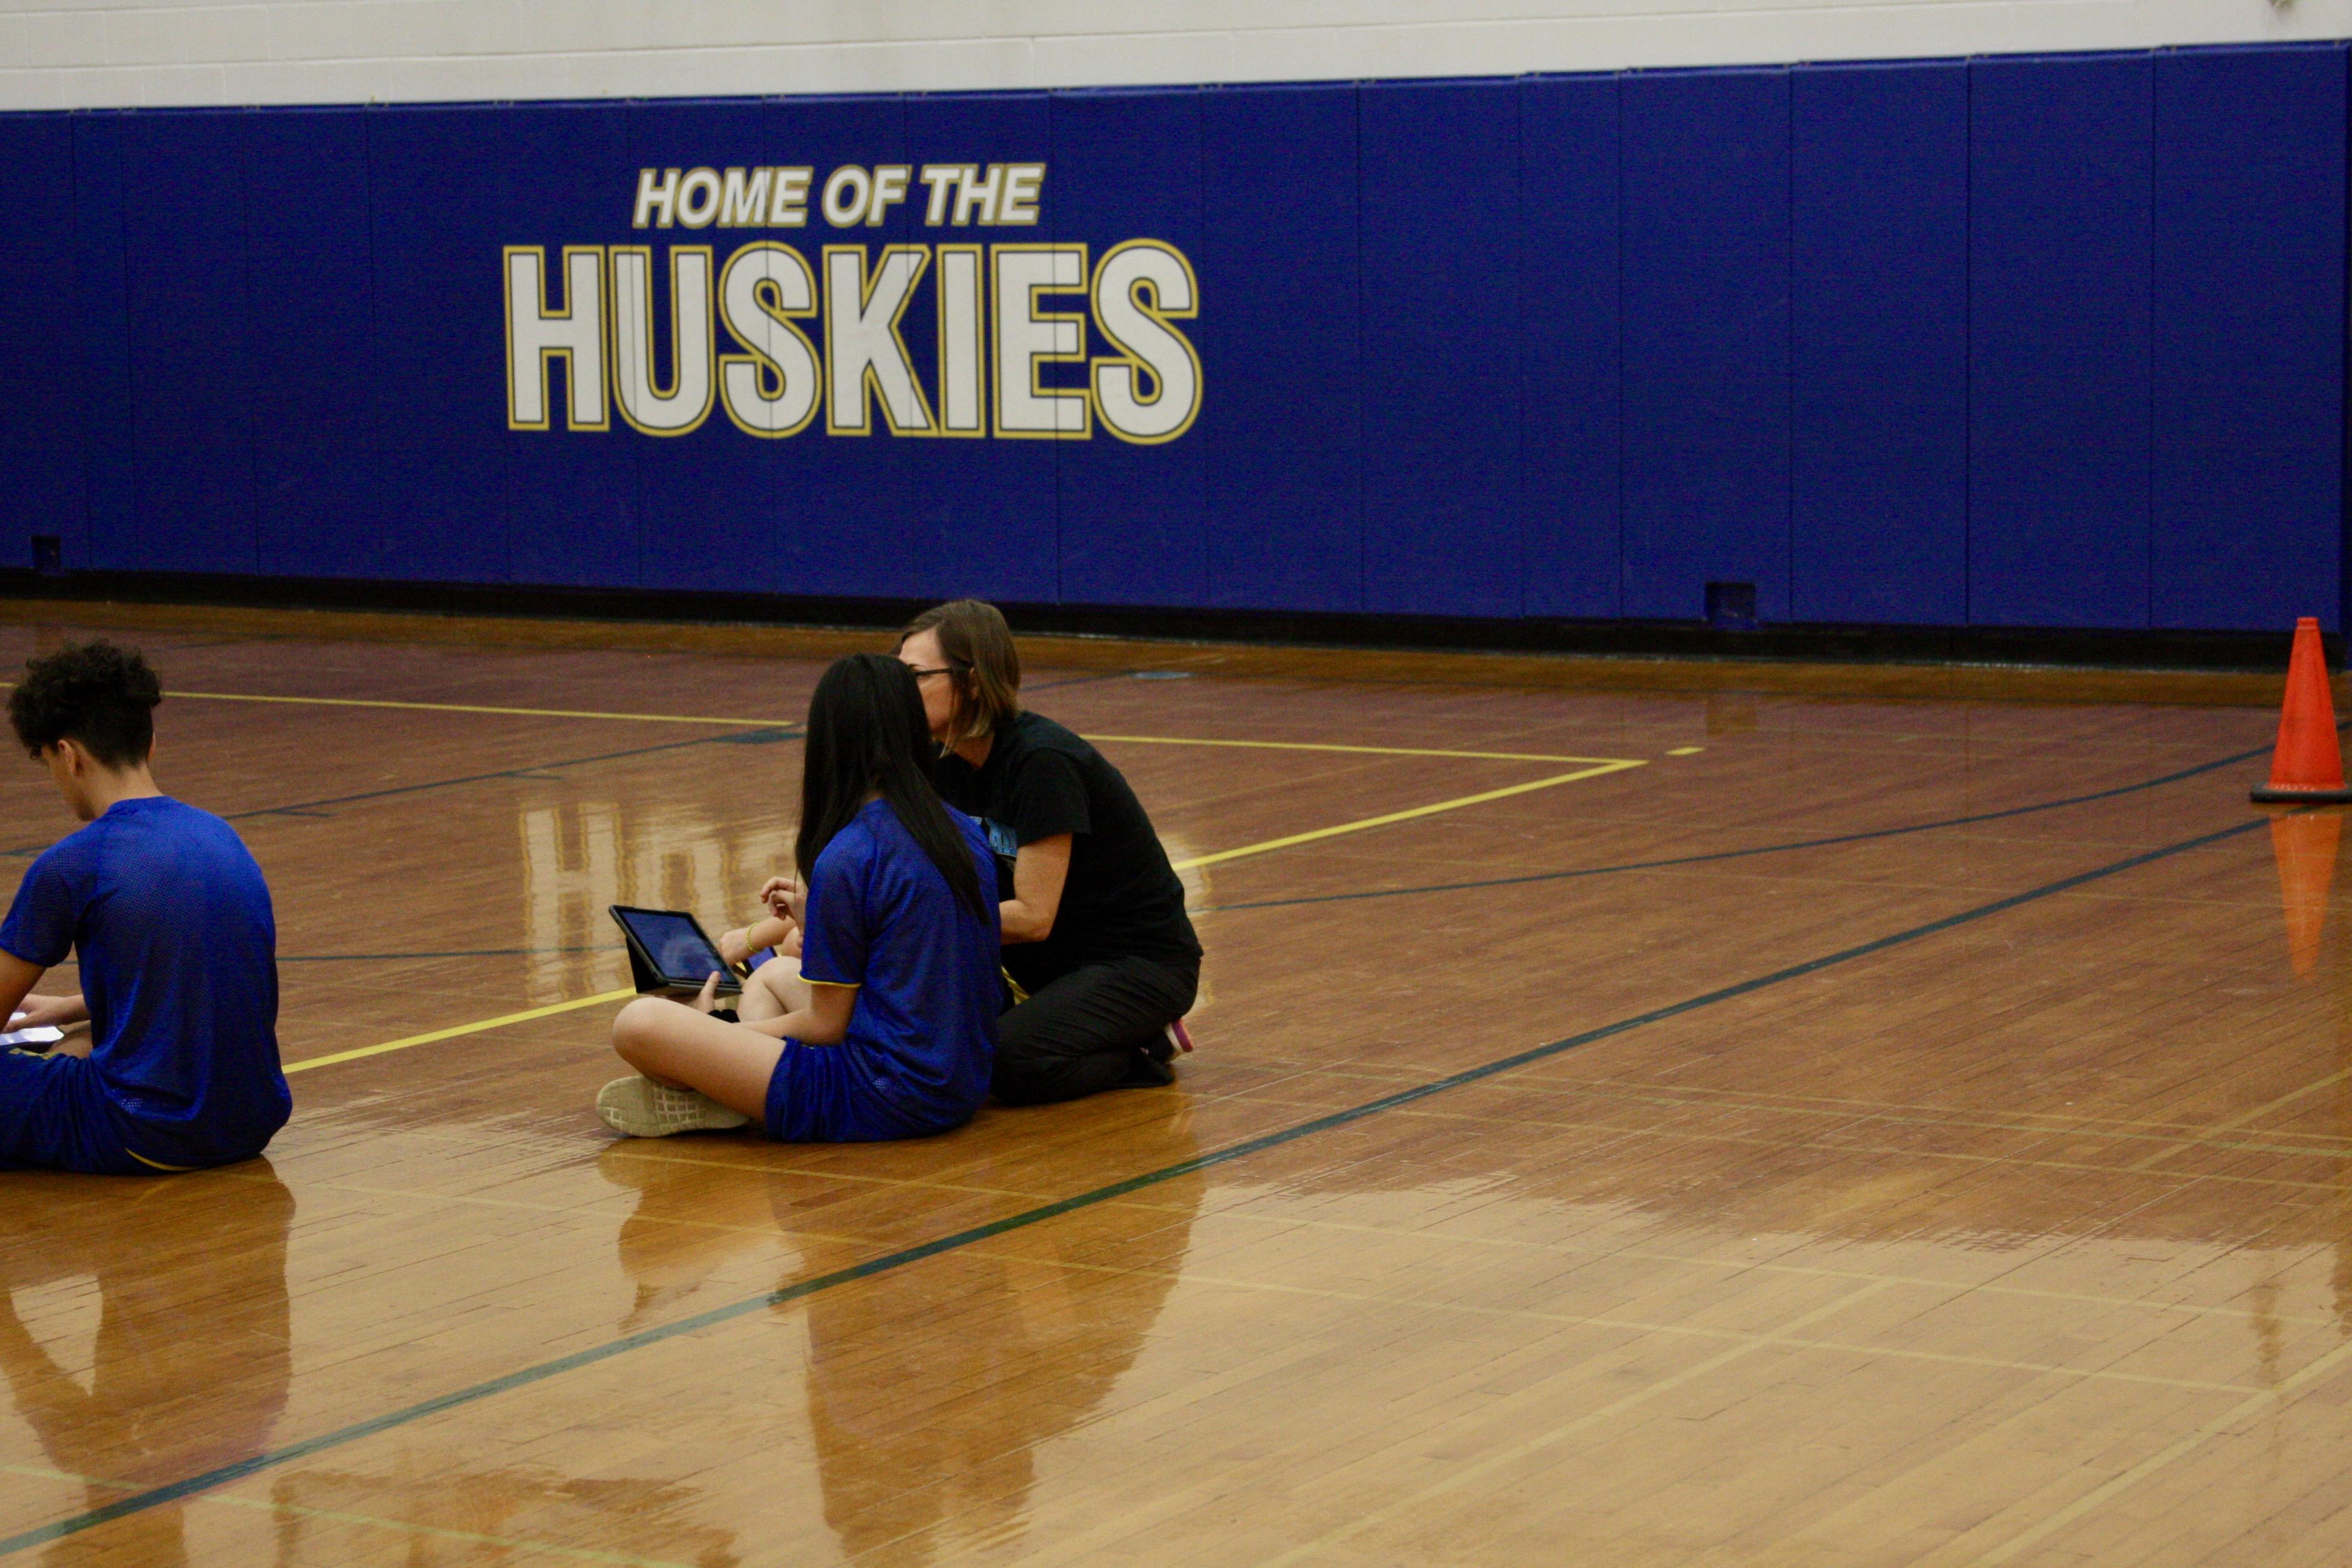 Science teacher working with student during PE class.